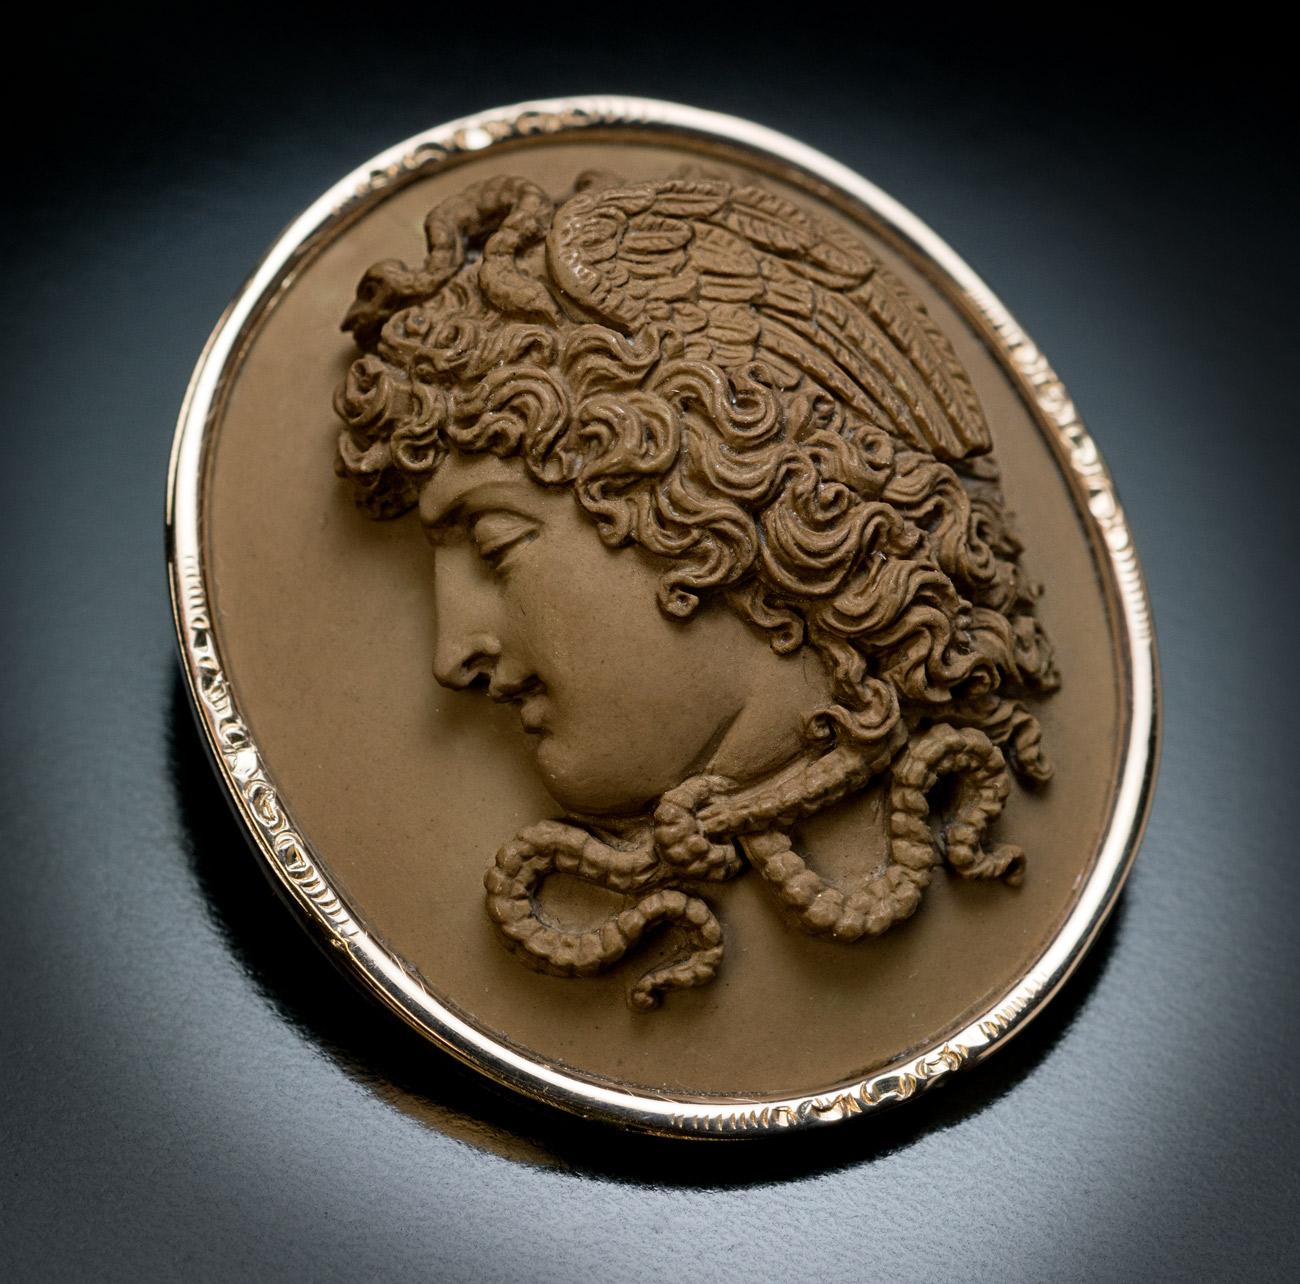 Circa 1860

An antique Italian lava cameo is superbly carved in high relief with a powerful depiction of mythological Medusa Gorgon.

The cameo is set in a 14K gold frame and mounted as a brooch.

Size 43 x 36 mm (1 11/16 x 1 7/16 in.)